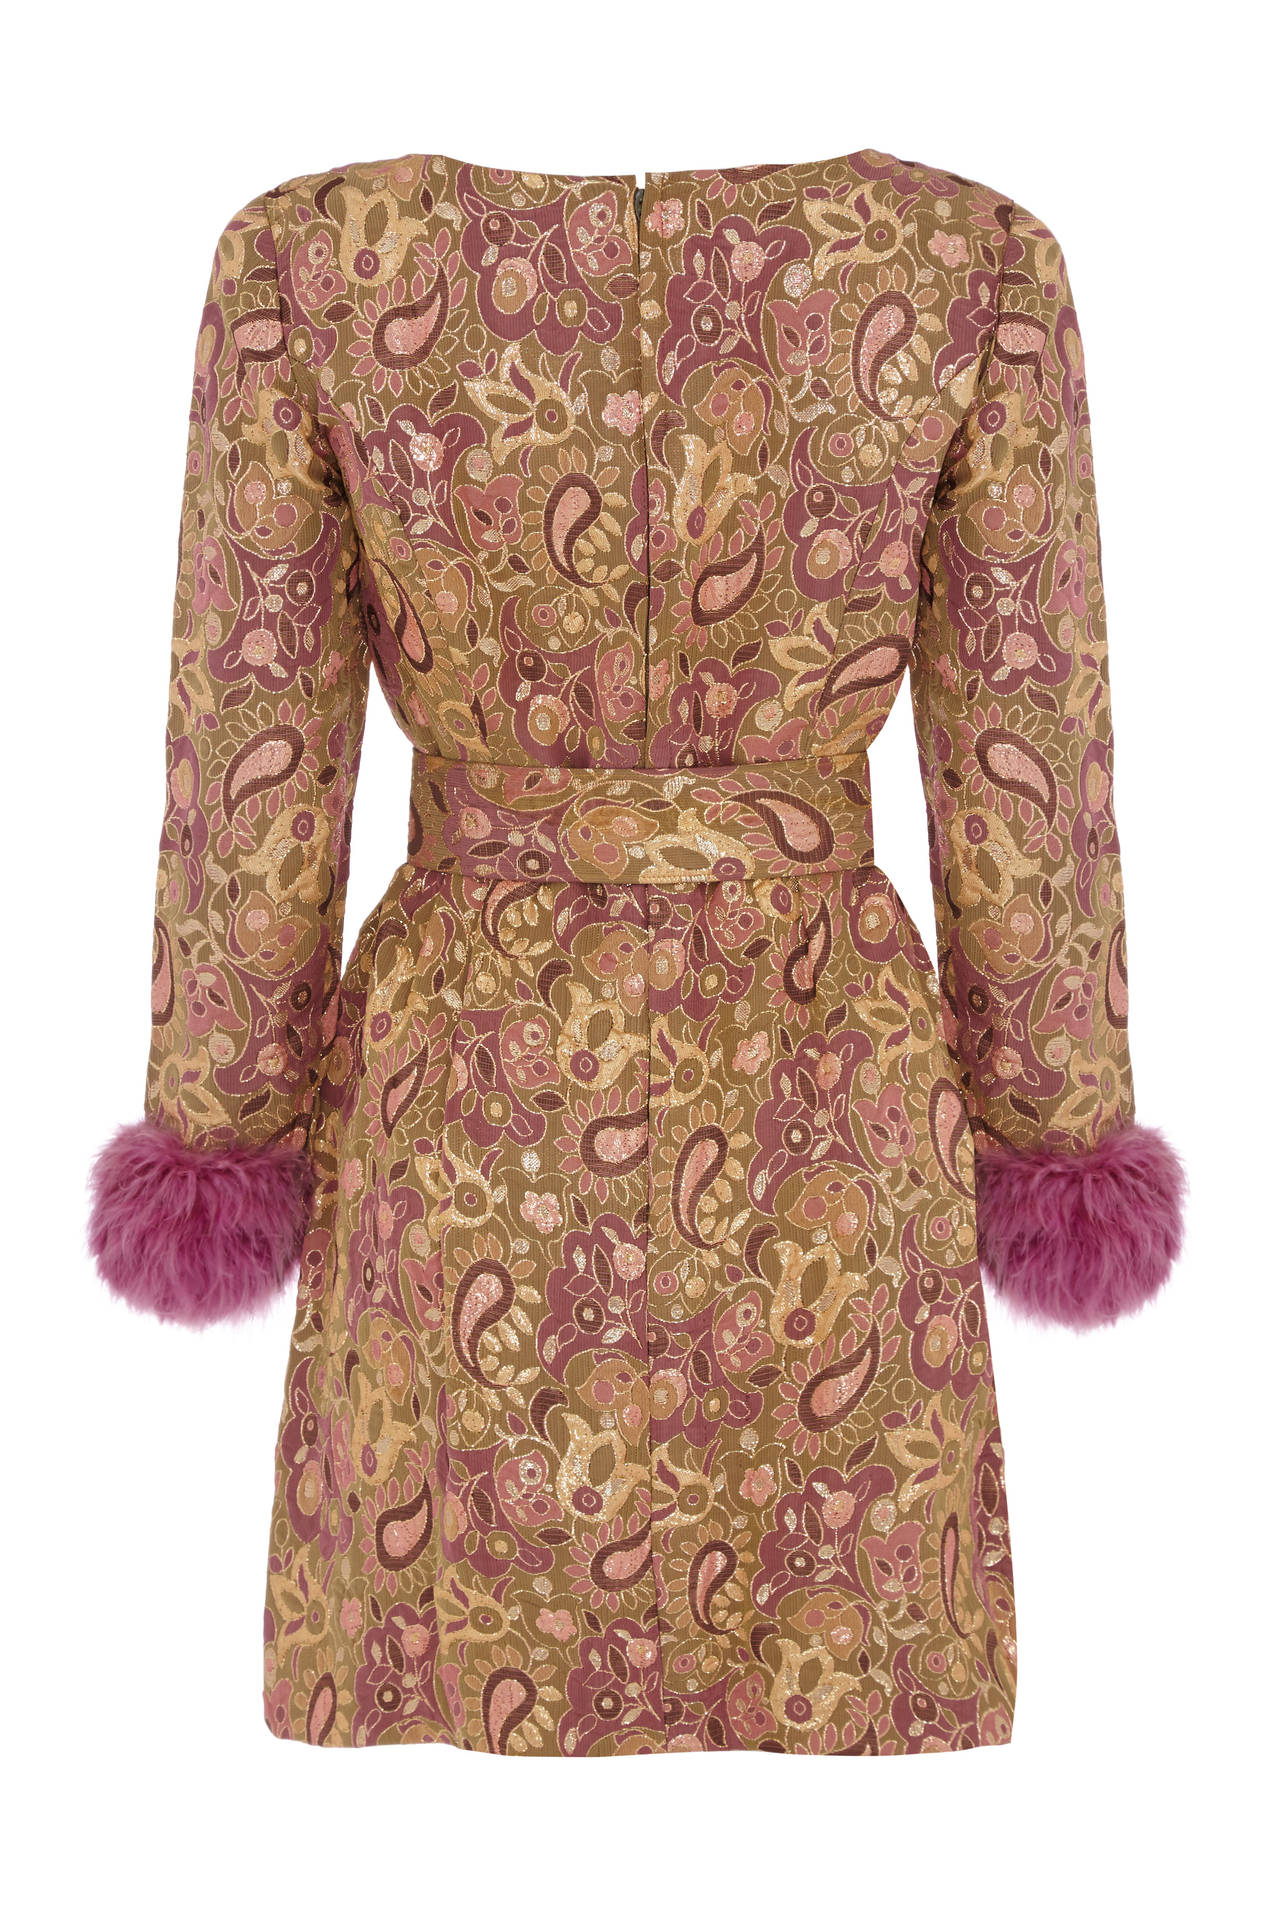 Fabulous purple brocade dress with gold metallic threads running throughout by iconic designer Jean Varon.  This is a fantastic 60s piece and features full length sleeves with purple fur cuffs and a bubble hem skirt.  Inside the dress is fully lined